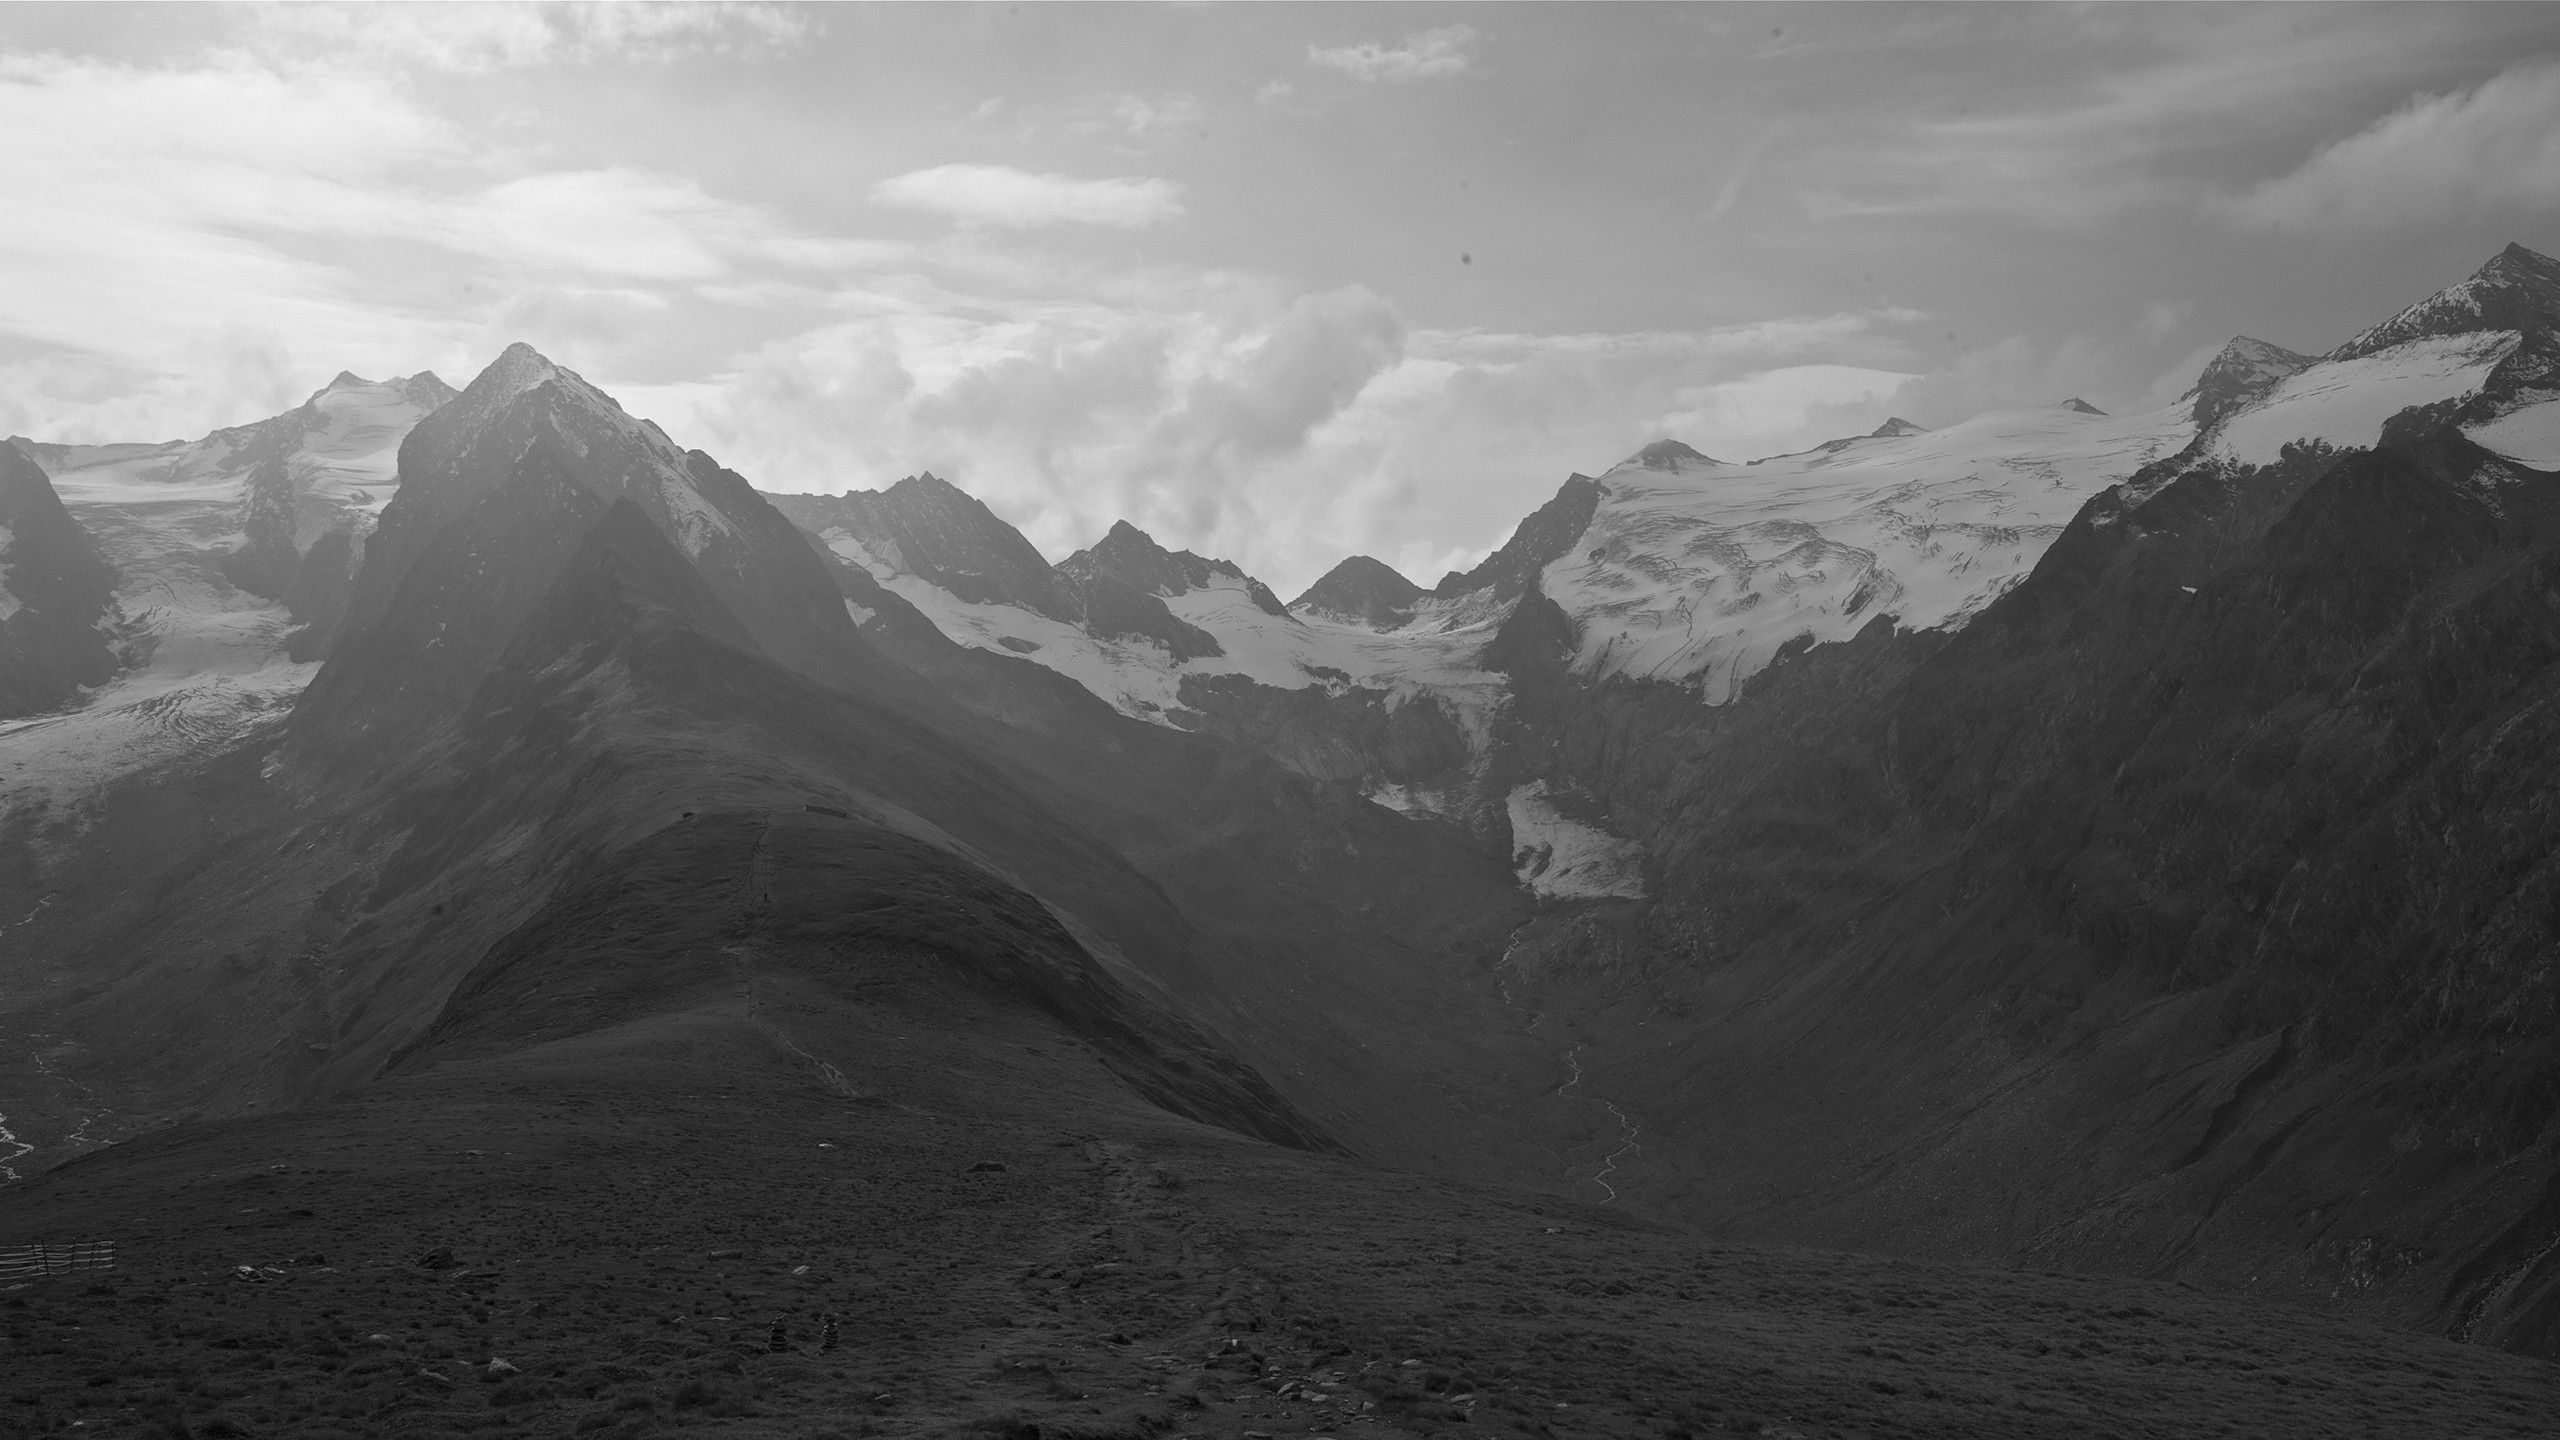 Download Wallpaper 2560x1440 Mountains, Distance, Sky, Black and ...